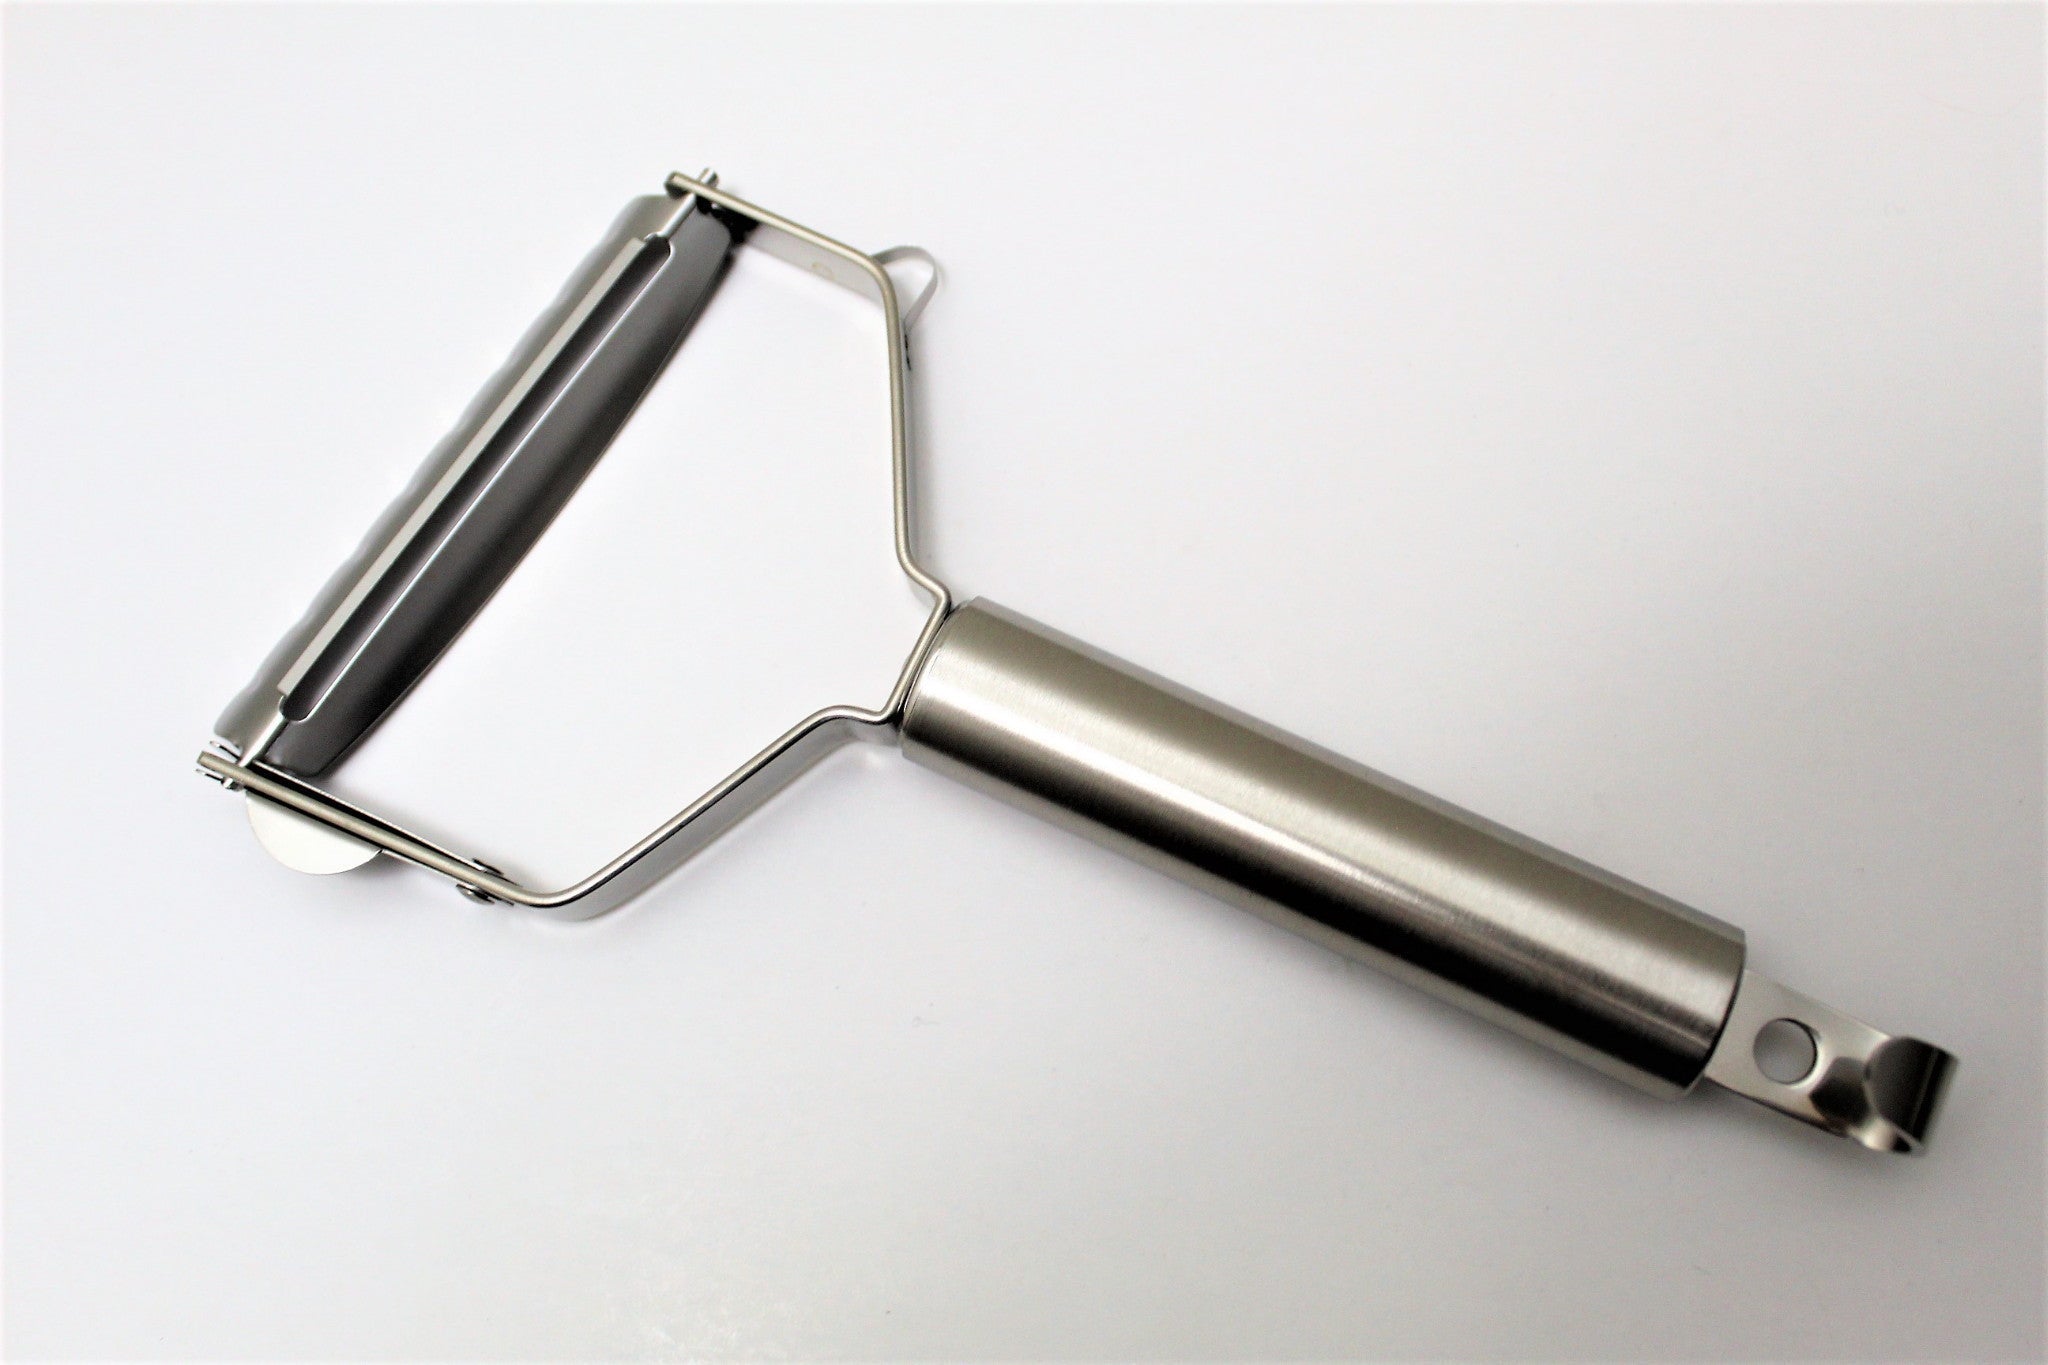 KAI SELECT 100 Stainless Steel Wide Peeler T Type DH-3107 MADE IN JAPAN